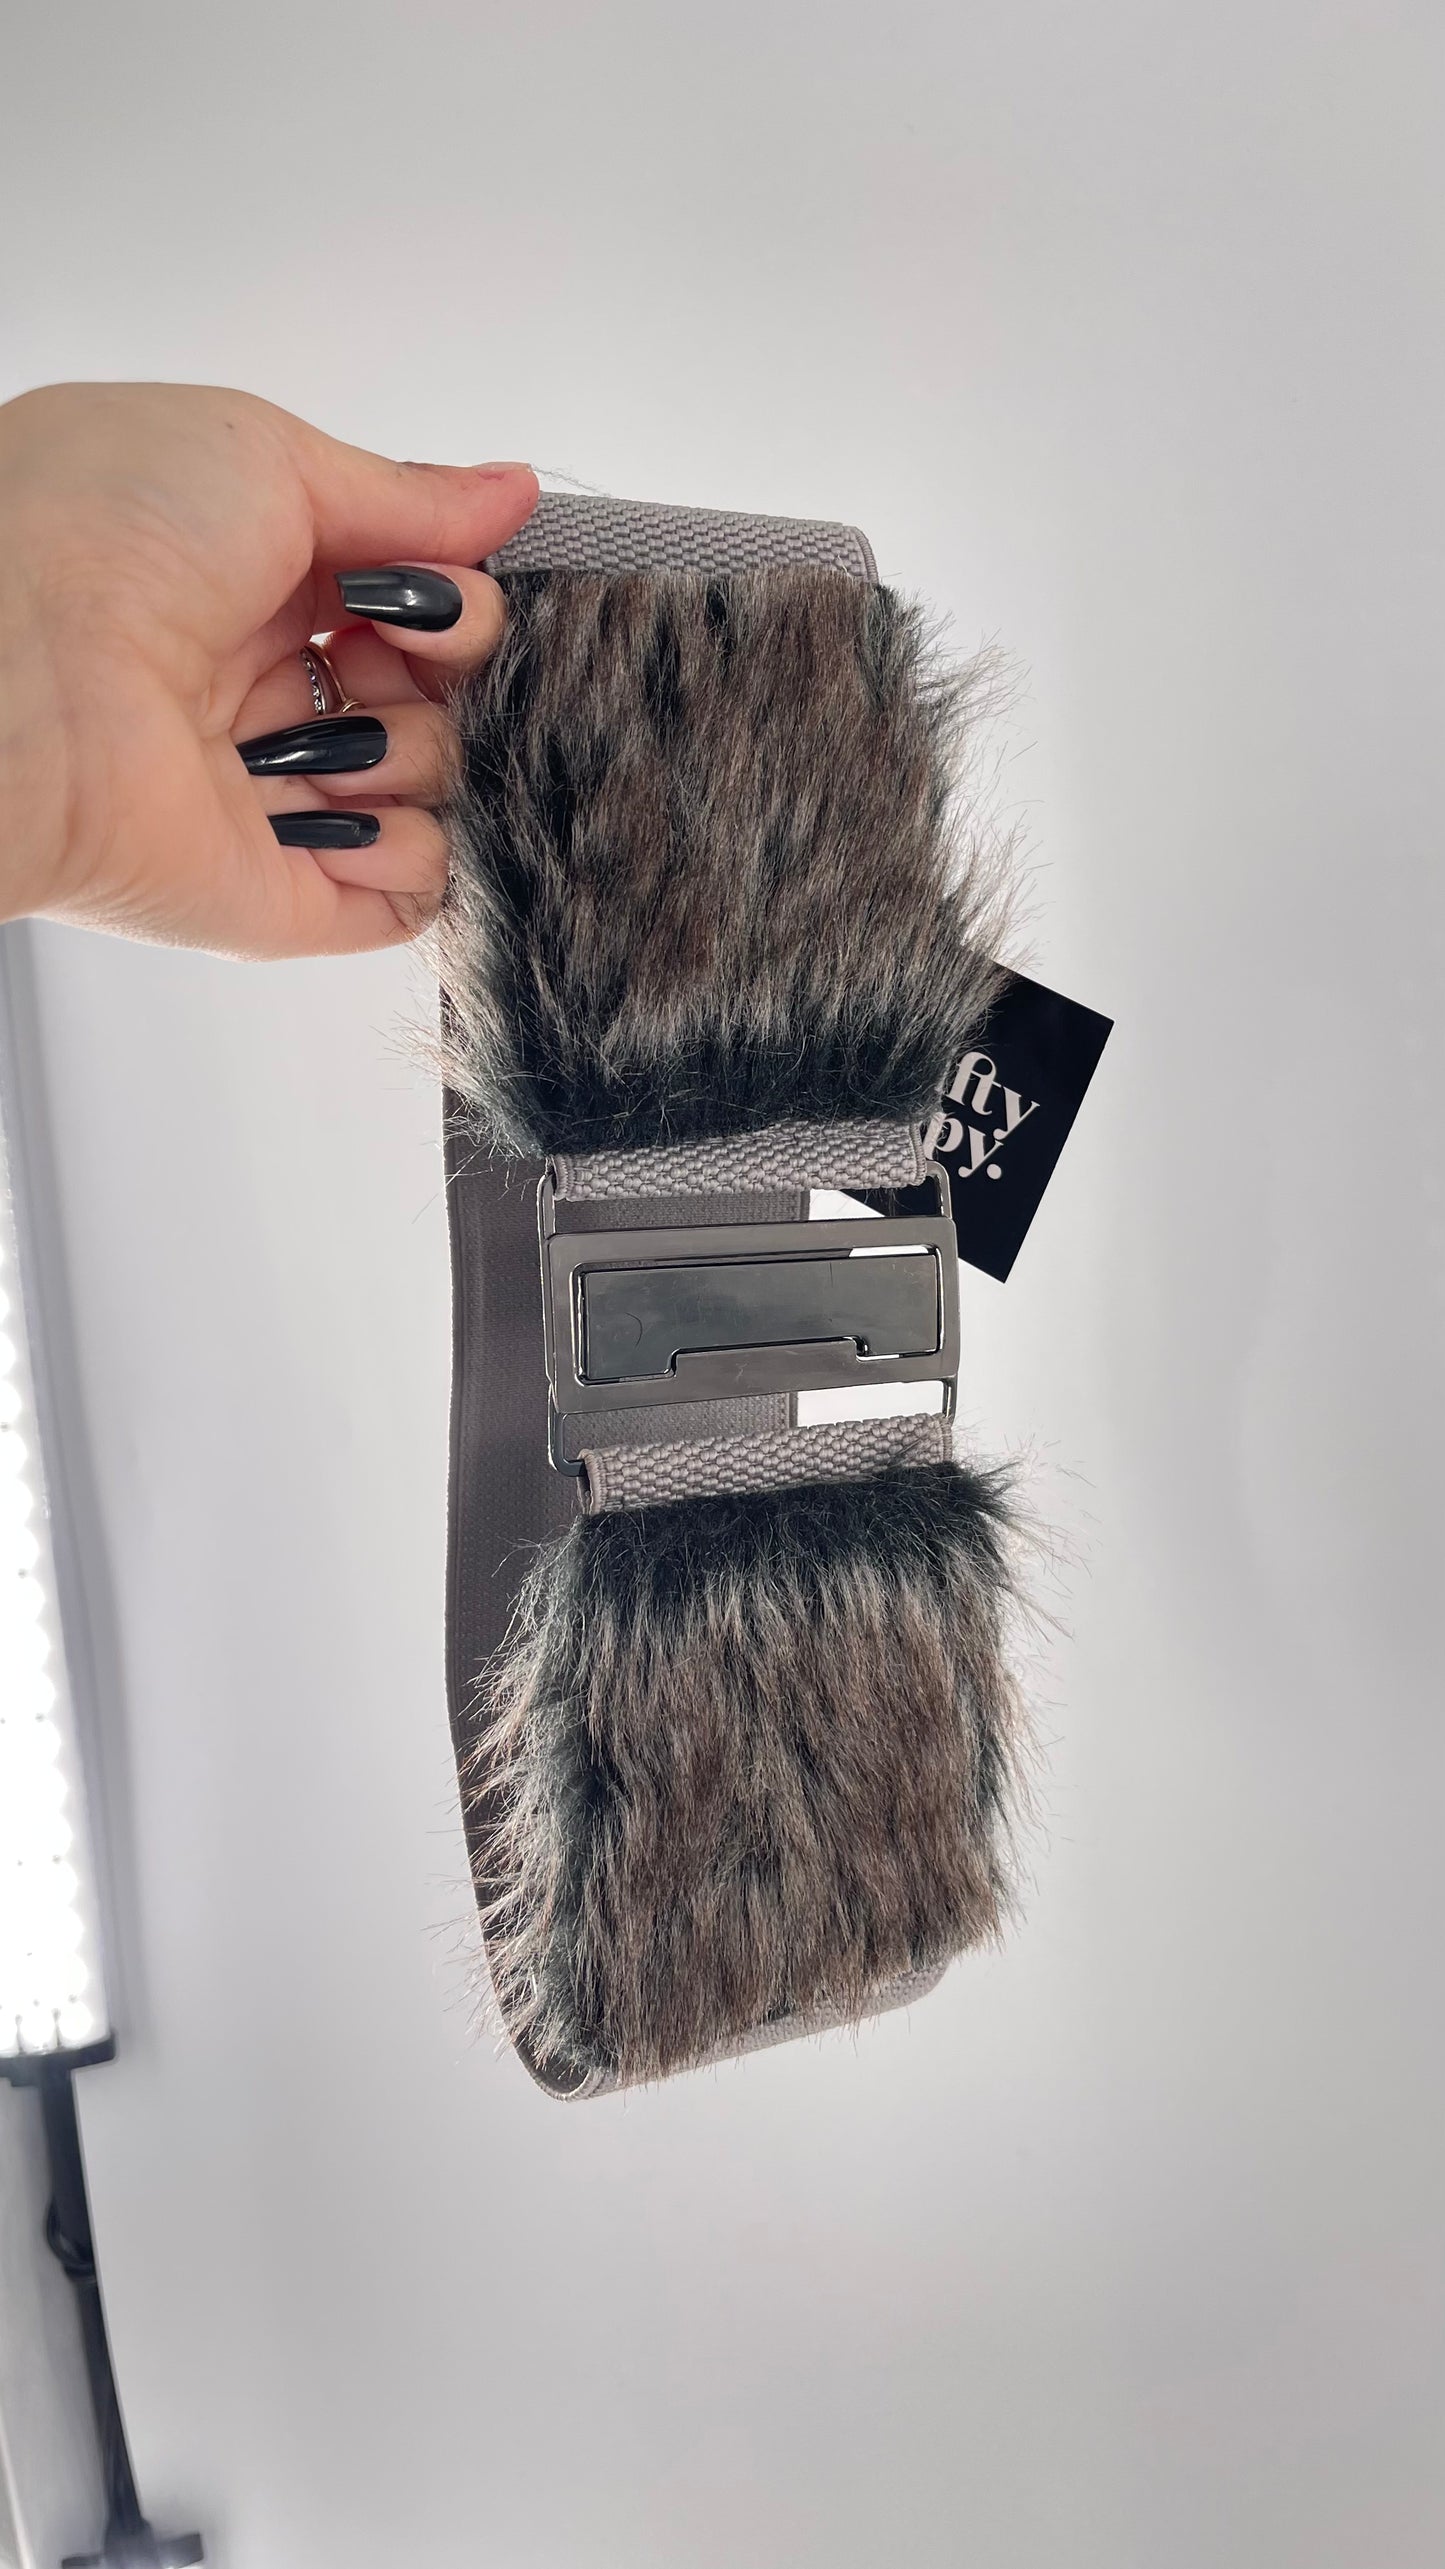 Urban Outfitters Gray Stretchy Waist Belt with Faux Fur Trim Detail and Metal Clasp